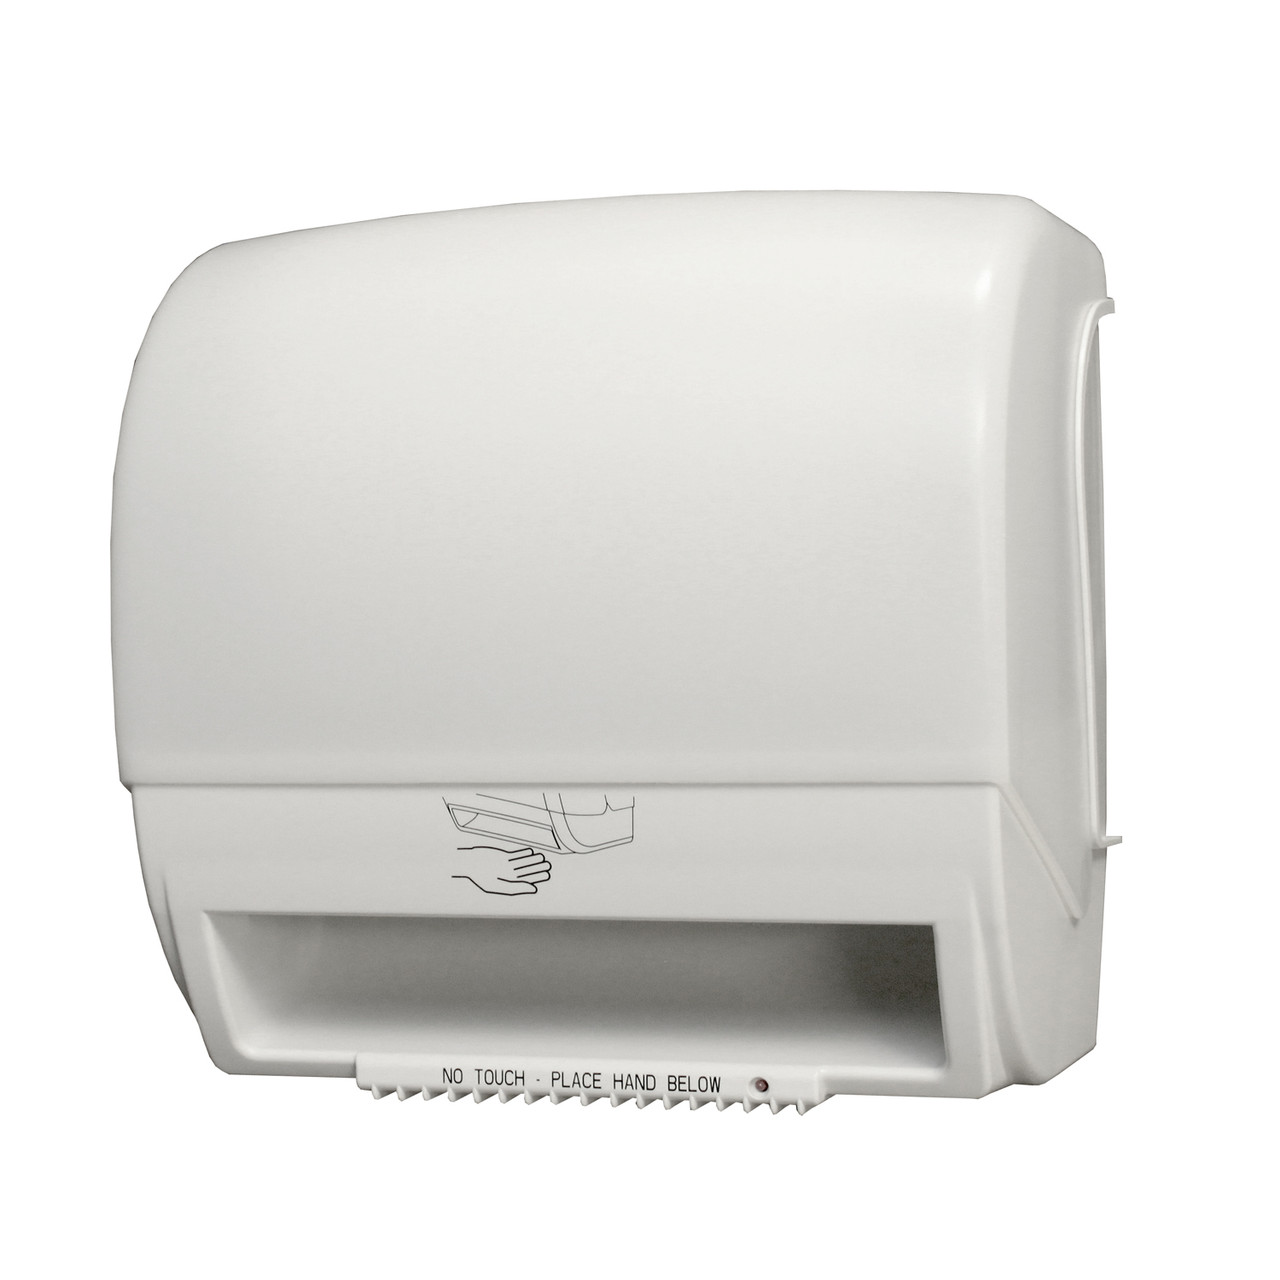 Palmer Fixture Electronic Hands Free Roll Paper Towel Dispenser - 6” White Translucent TD0234-03